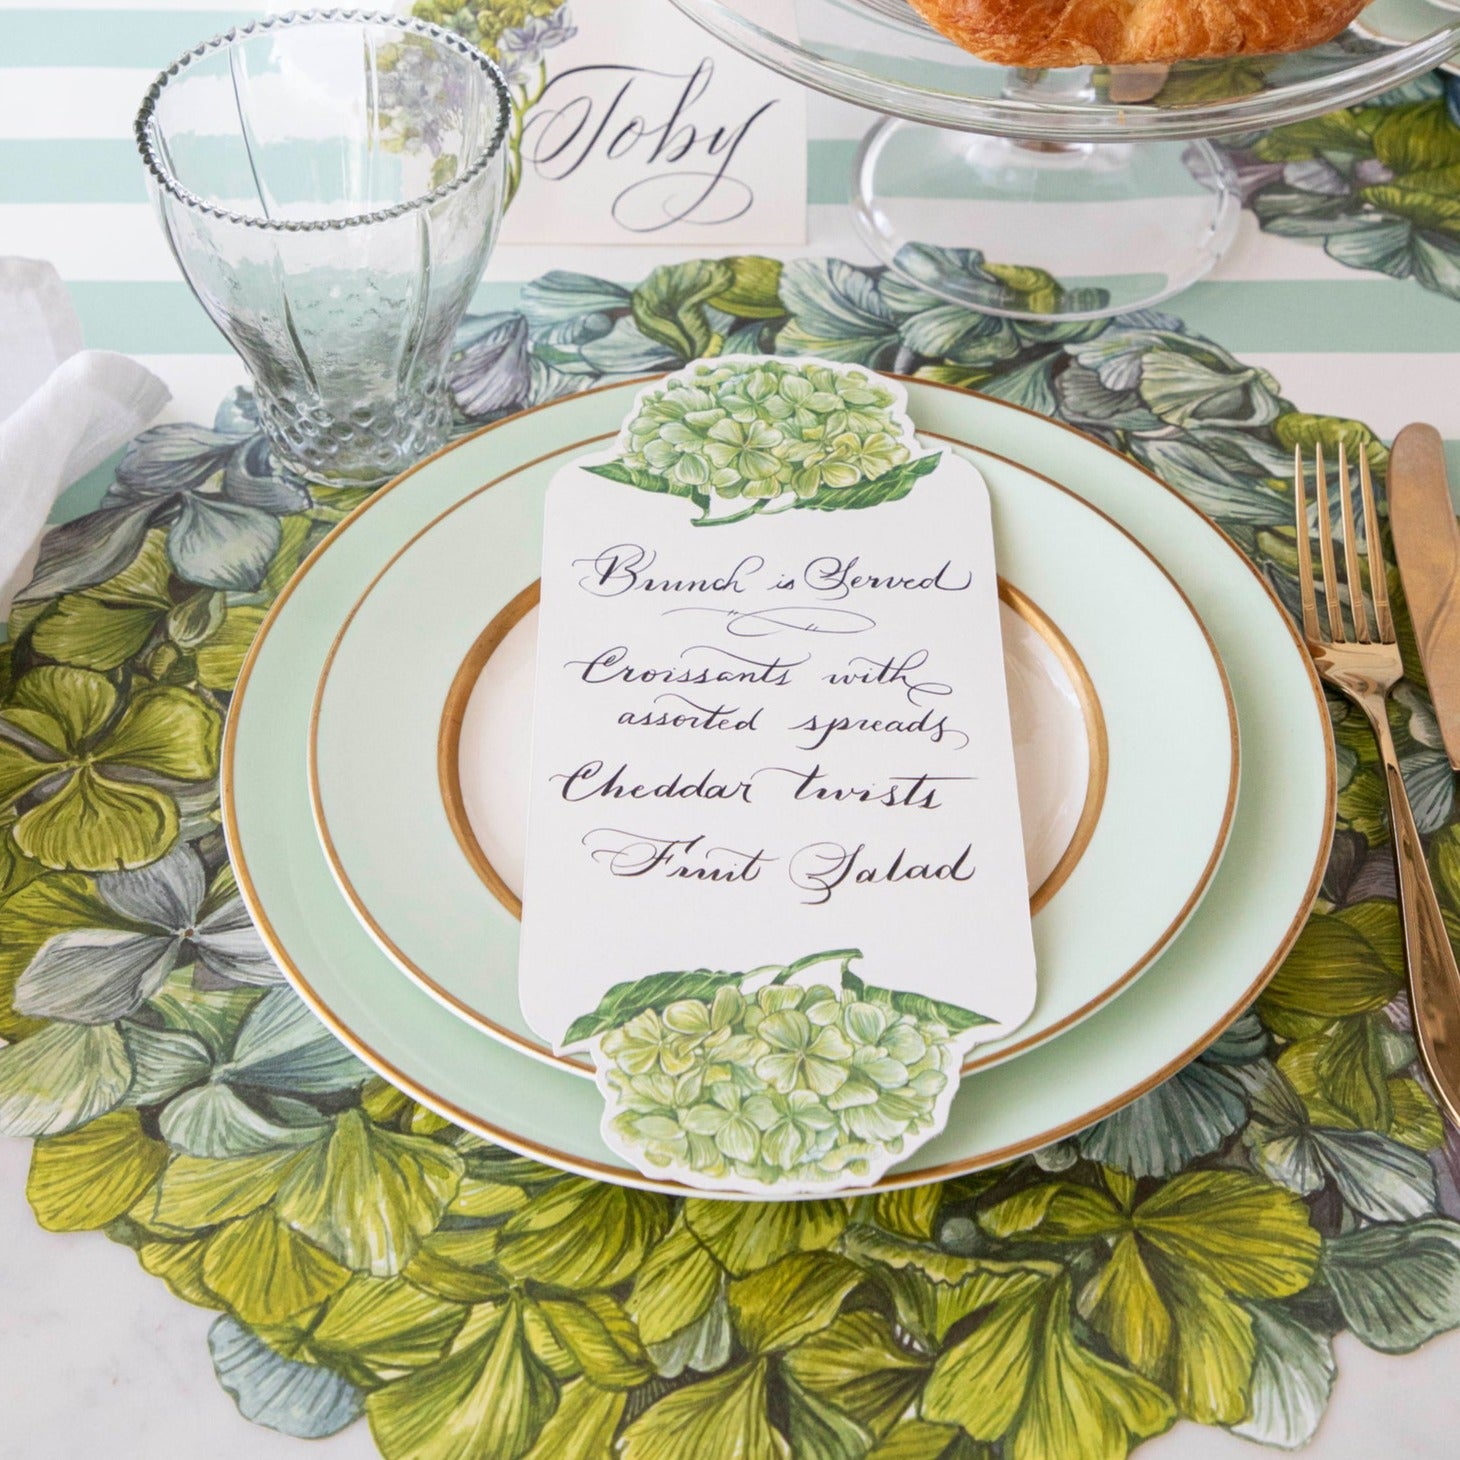 The Die-cut Hydrangea Placemat under an elegant place setting.